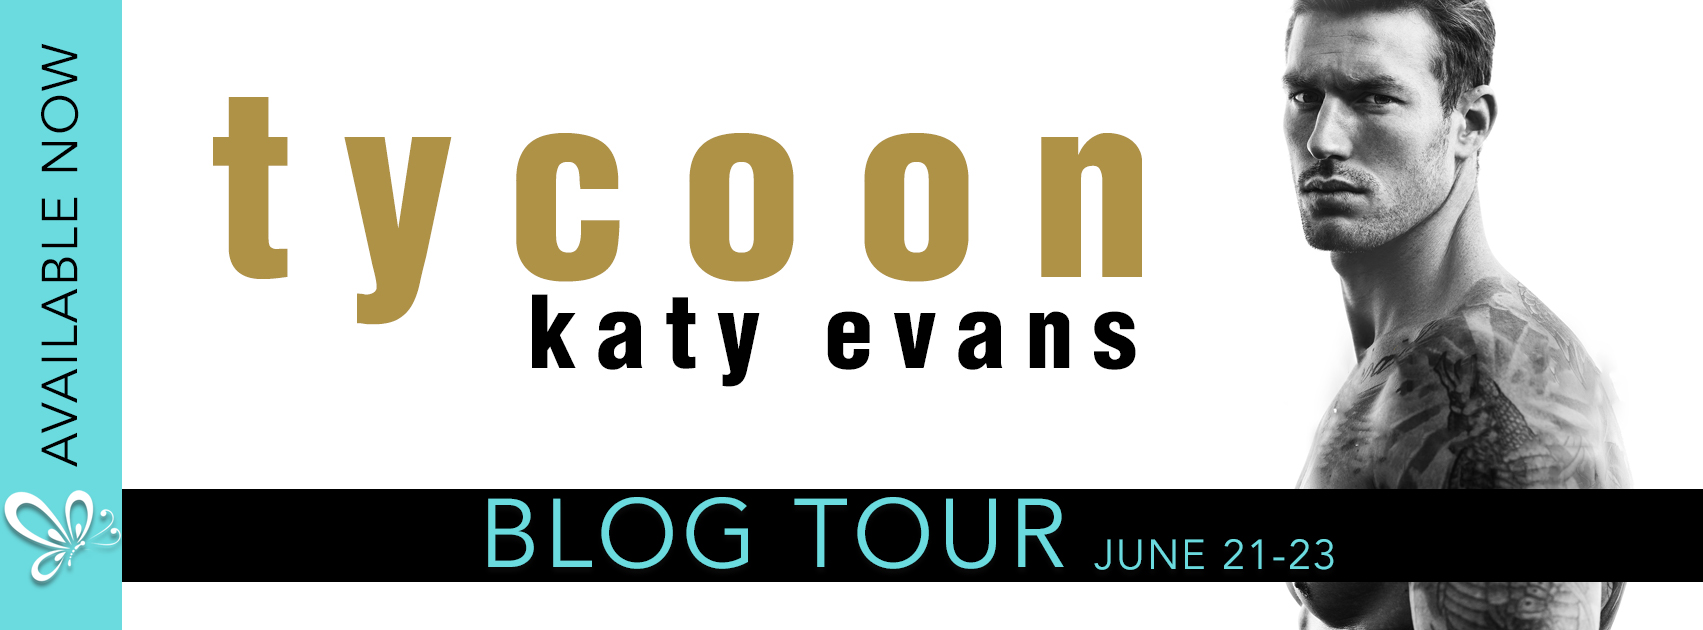 Blog Tour:  Tycoon by Katy Evans